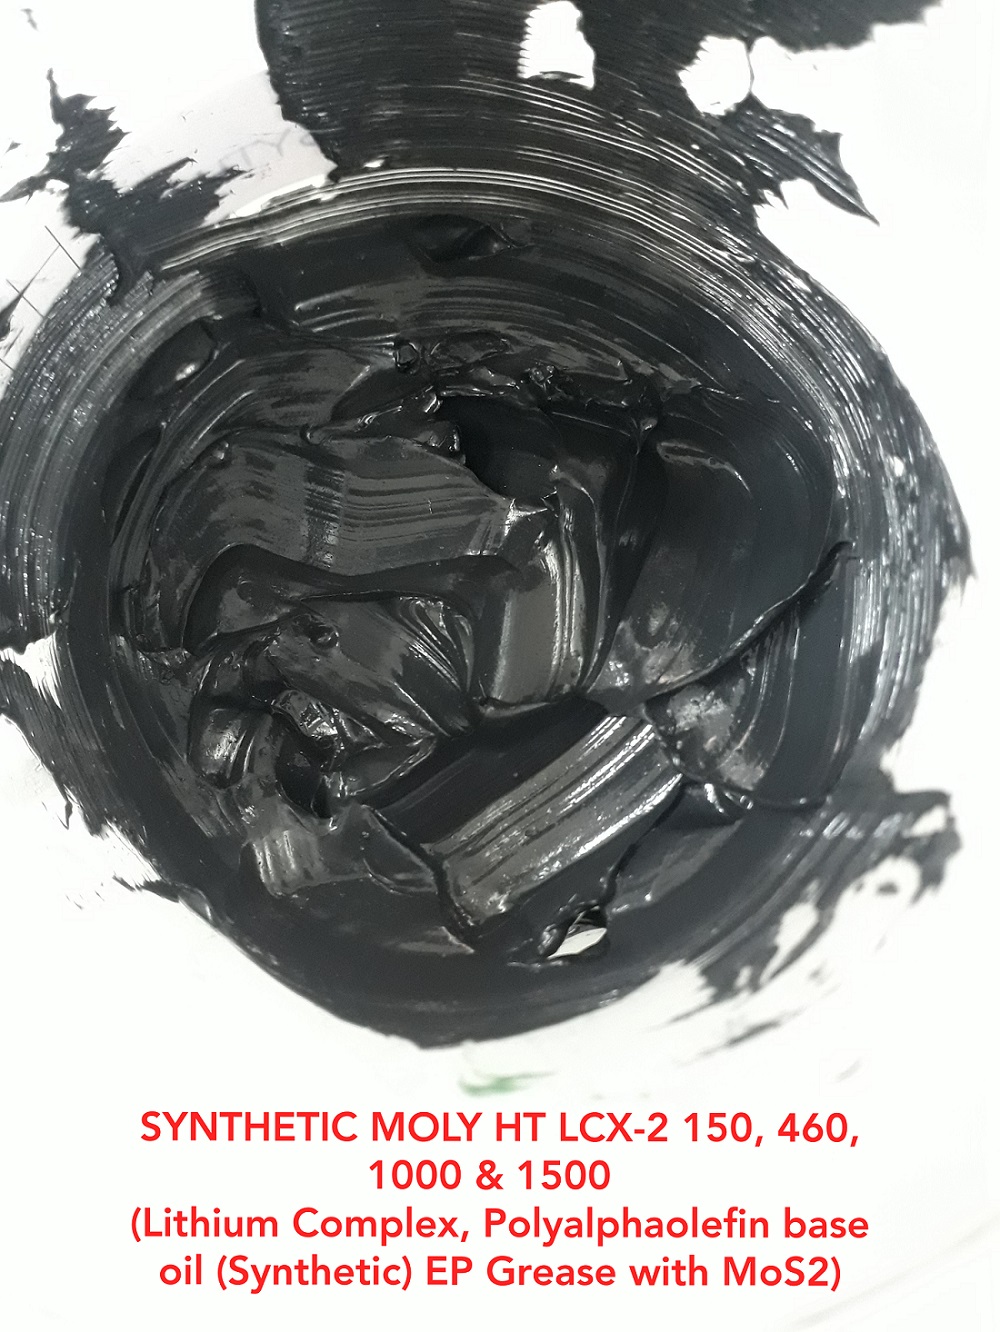 Synthetic Moly HT LCX-2 150, 460, 1000 & 1500